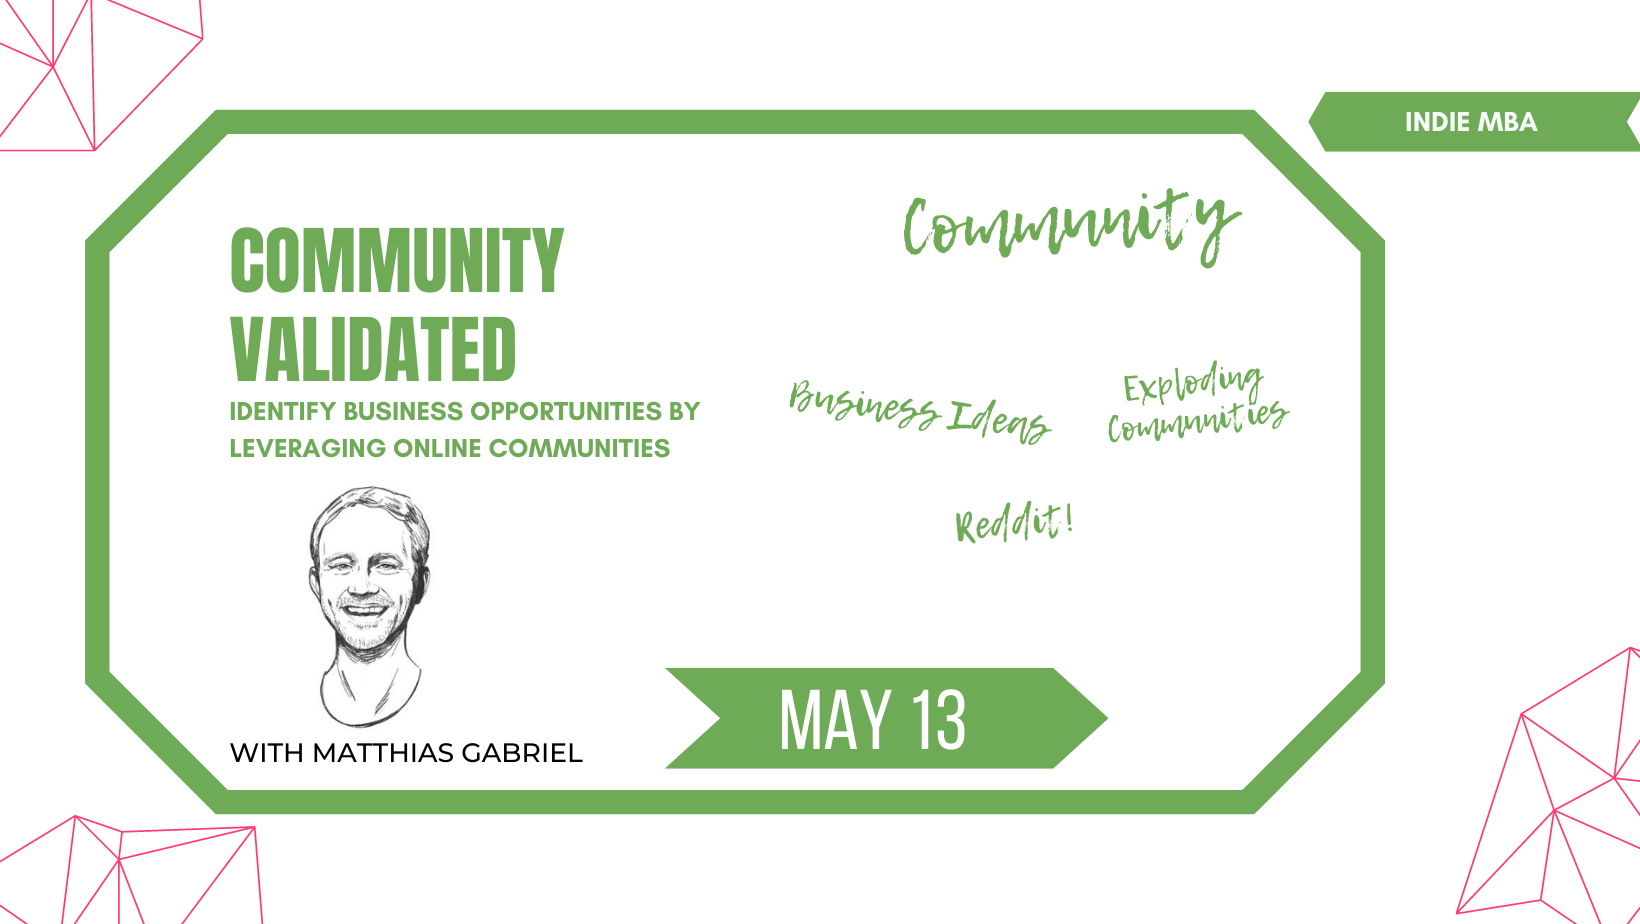 🚀 New video out: Community Validated - Identify business opportunities by leveraging online communities